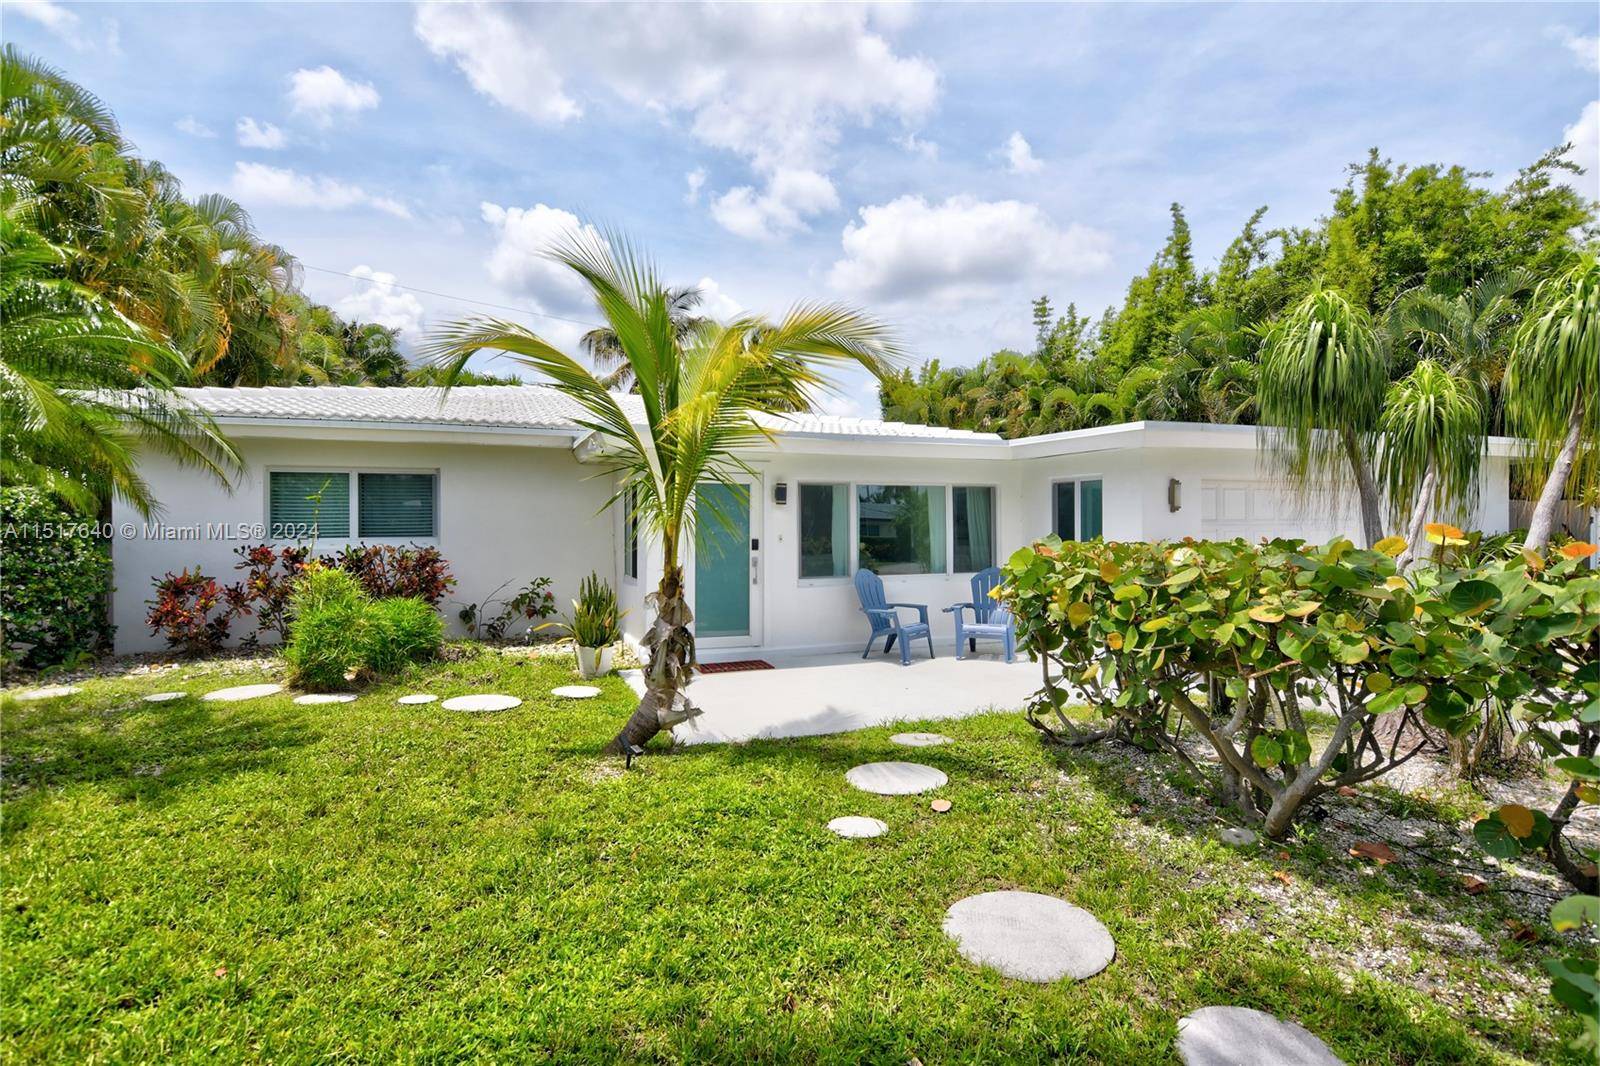 Embrace the quincentennial Florida lifestyle in this fabulous beach getaway !